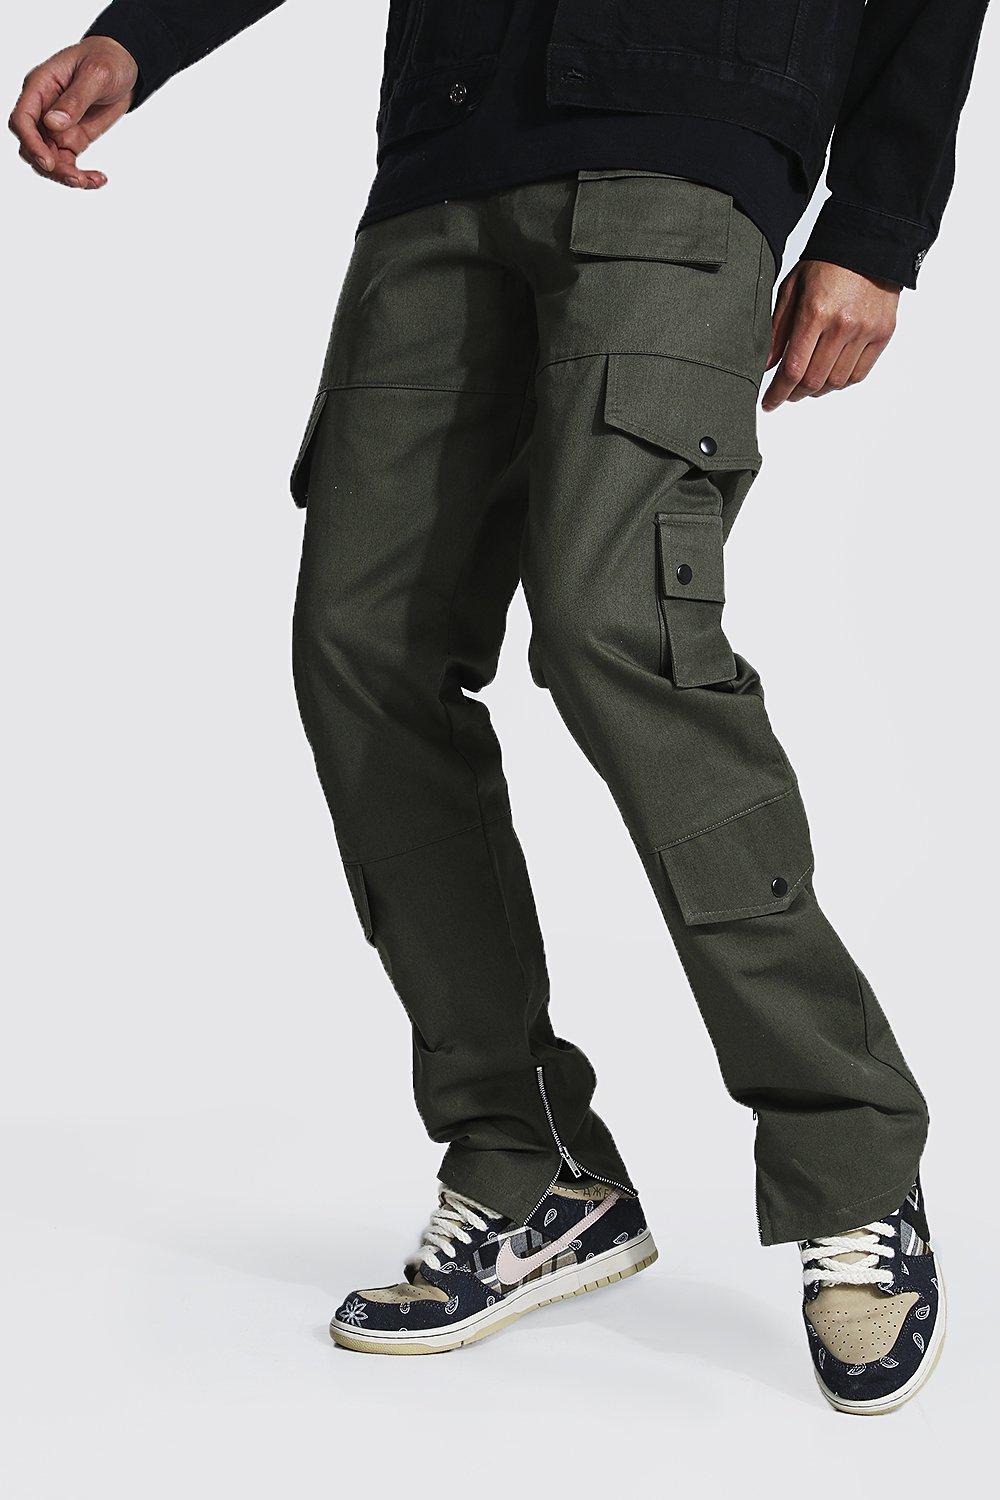 Tall Relaxed Fit Twill Cargo Pants, boohooMAN USA